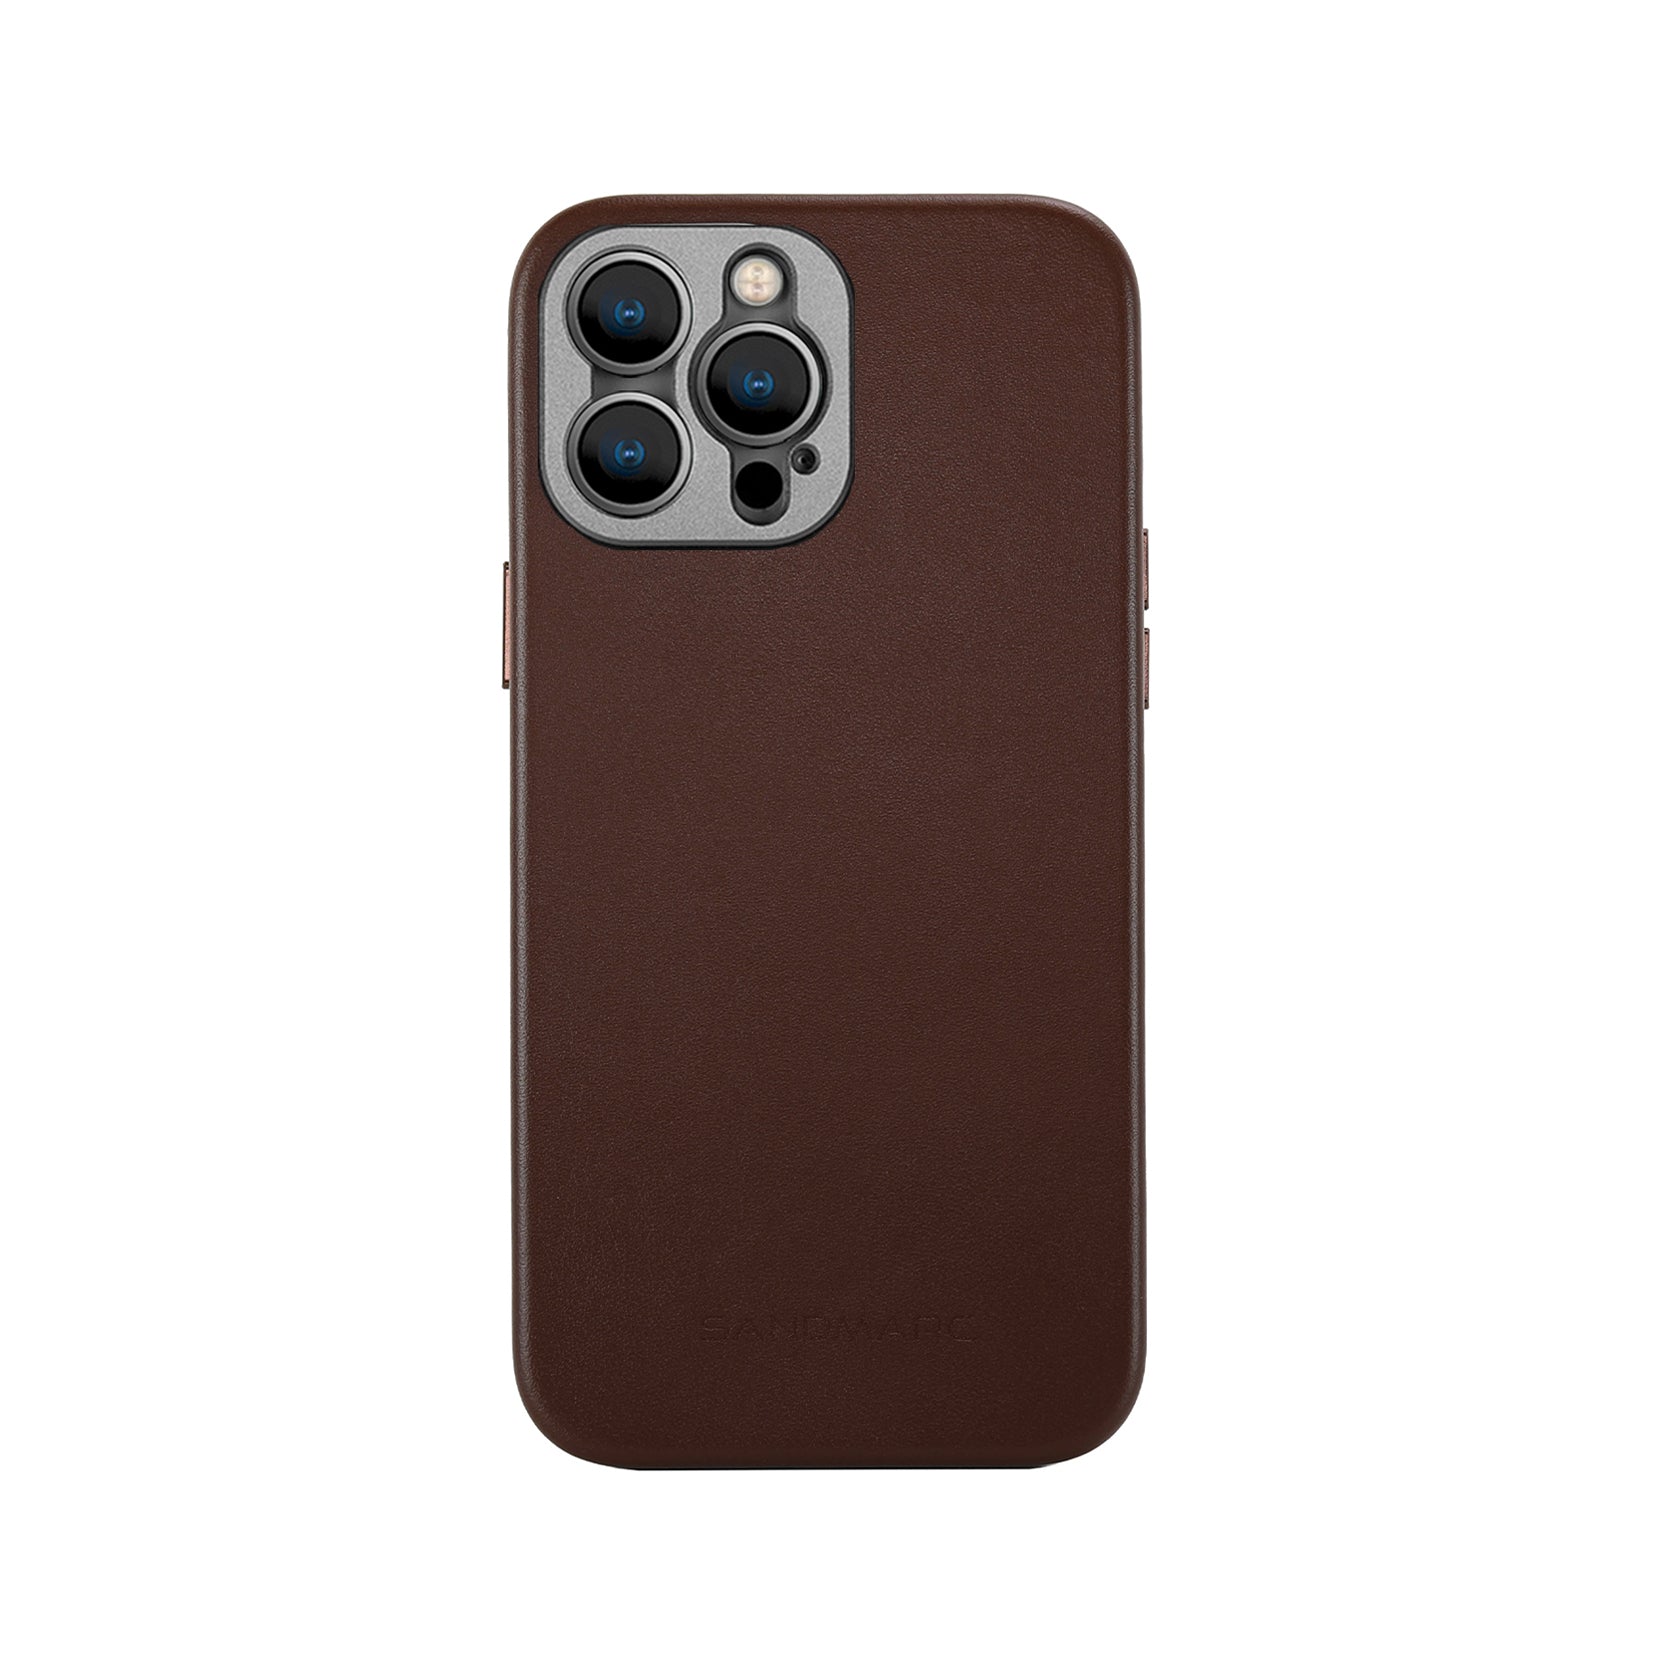 Pro Leather Case for iPhone 13 Pro with MagSafe